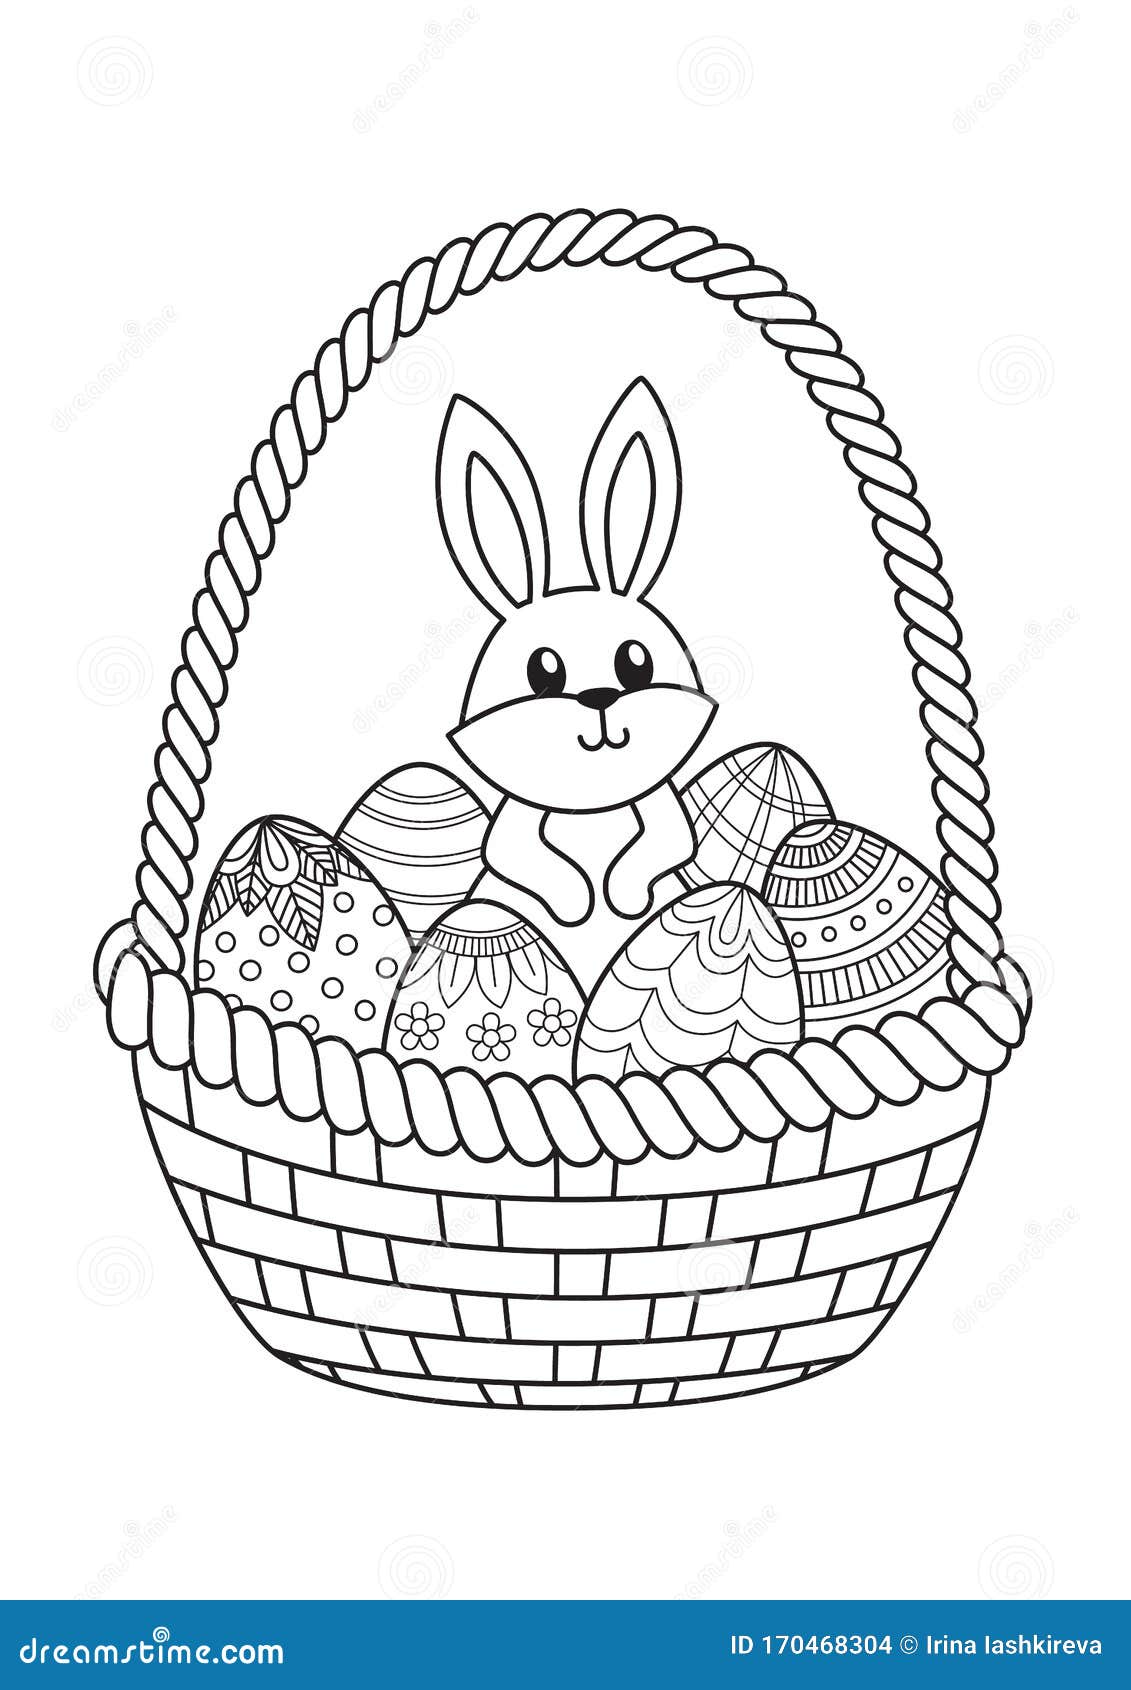 Doodle Coloring Book Page Easter Bunny in Bucket with Easter Eggs ...